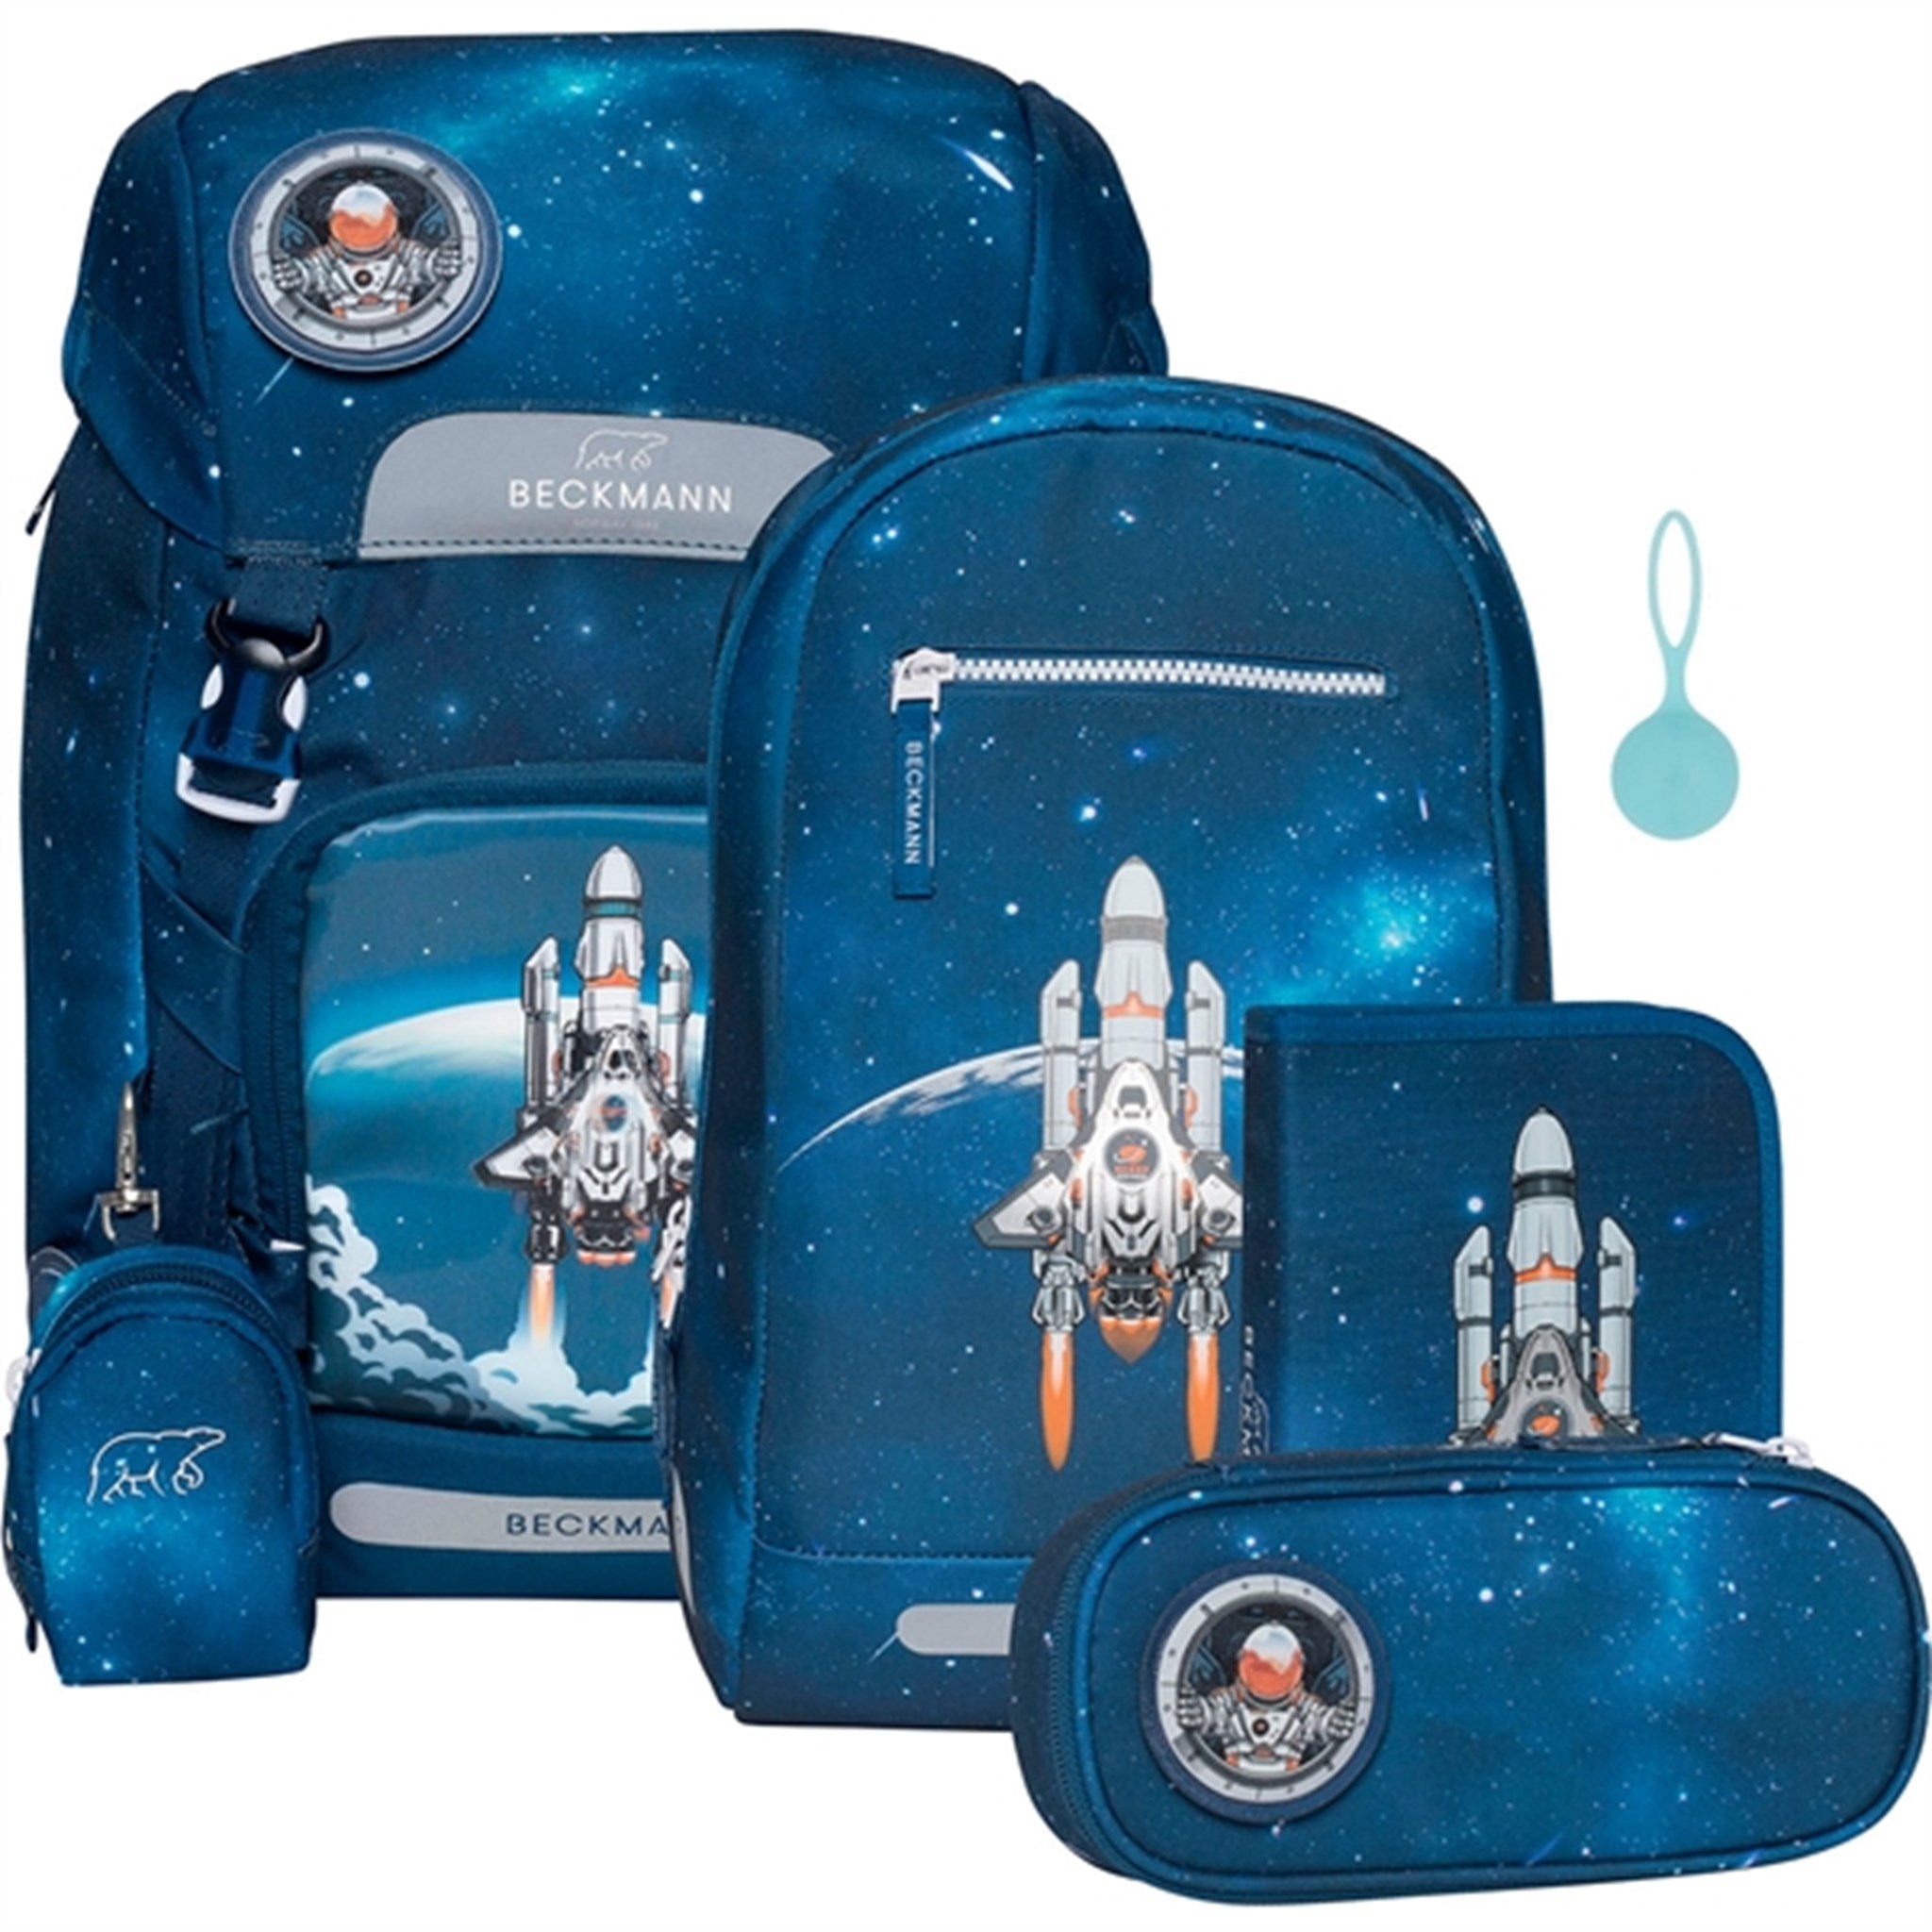 Beckmann Classic 6-pack Set Space Mission